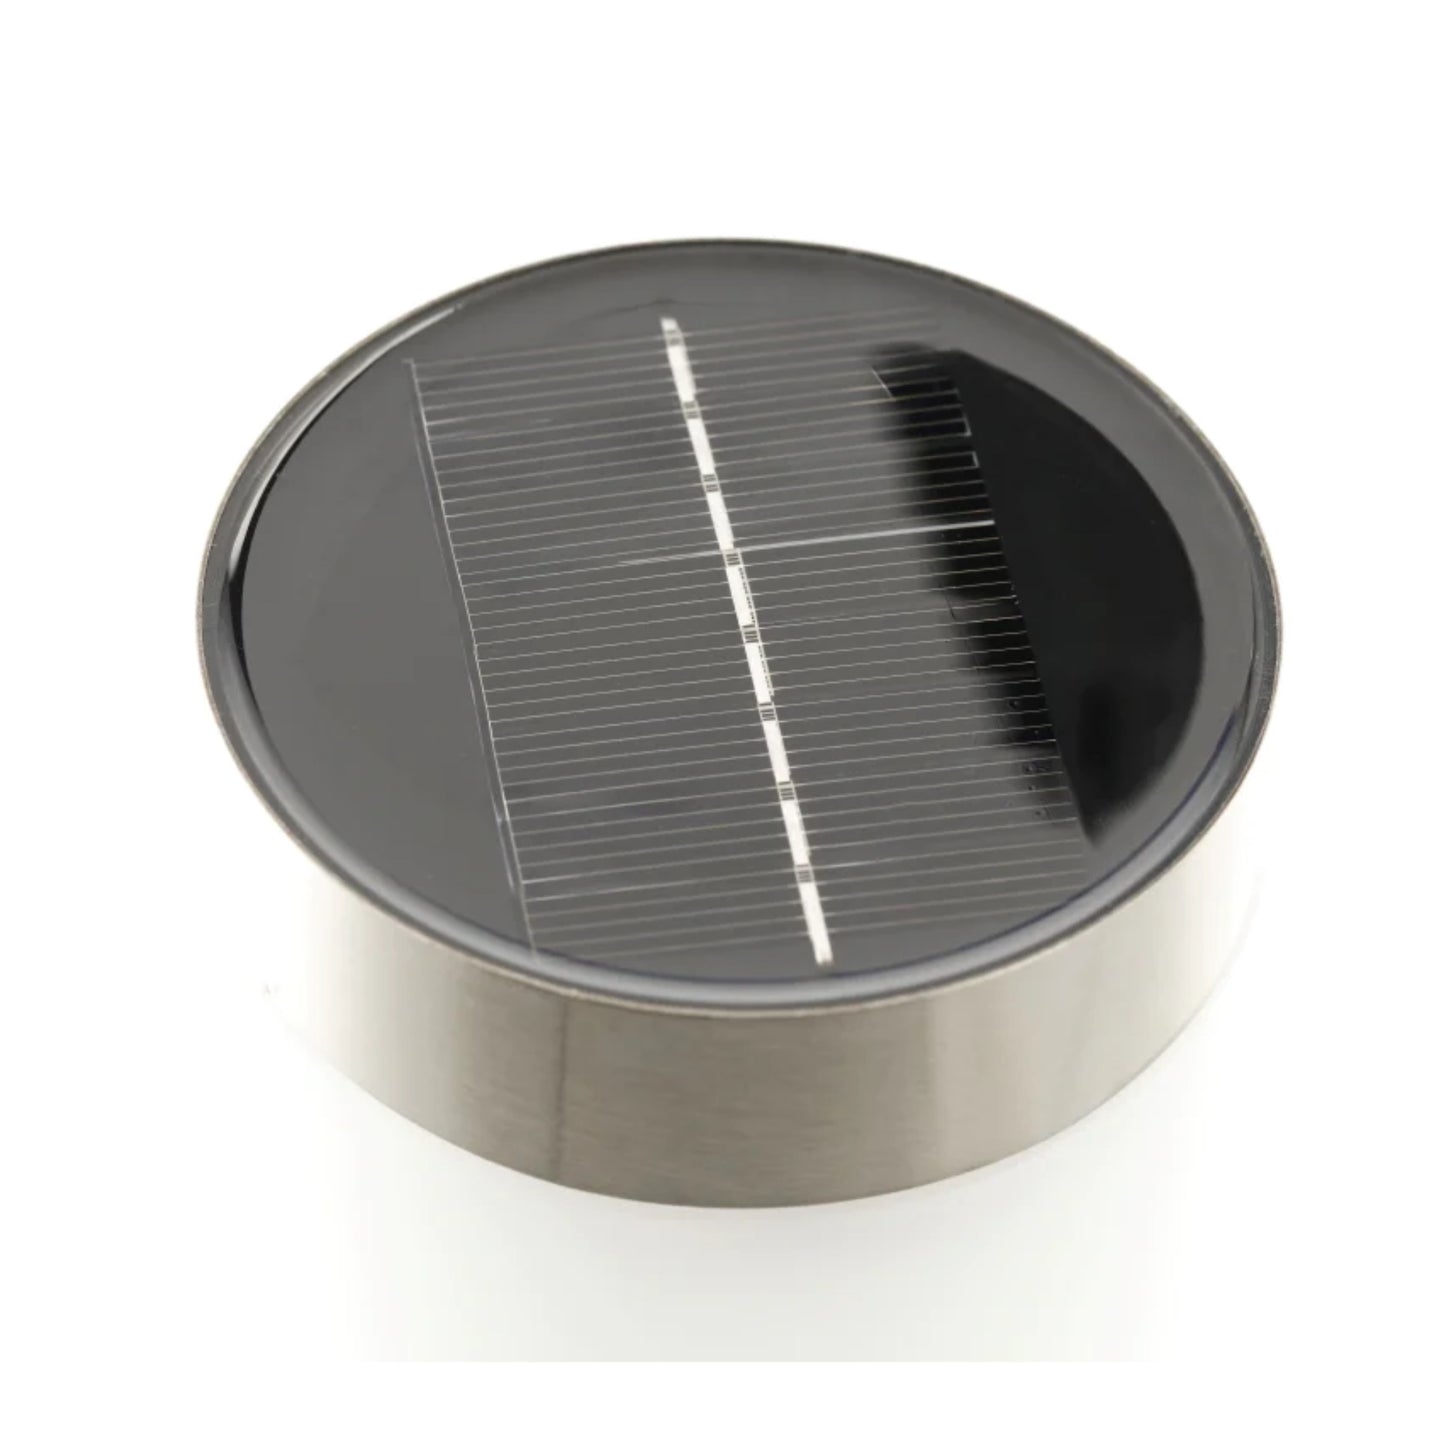 Introducing the Coze stainless steel Solar Post Lights - the perfect solution for anyone looking for quality outdoor lighting in small and affordable doses. These sophisticated lighting fixtures pack advanced technology and stylish design, making them a perfect addition to any outdoor space.